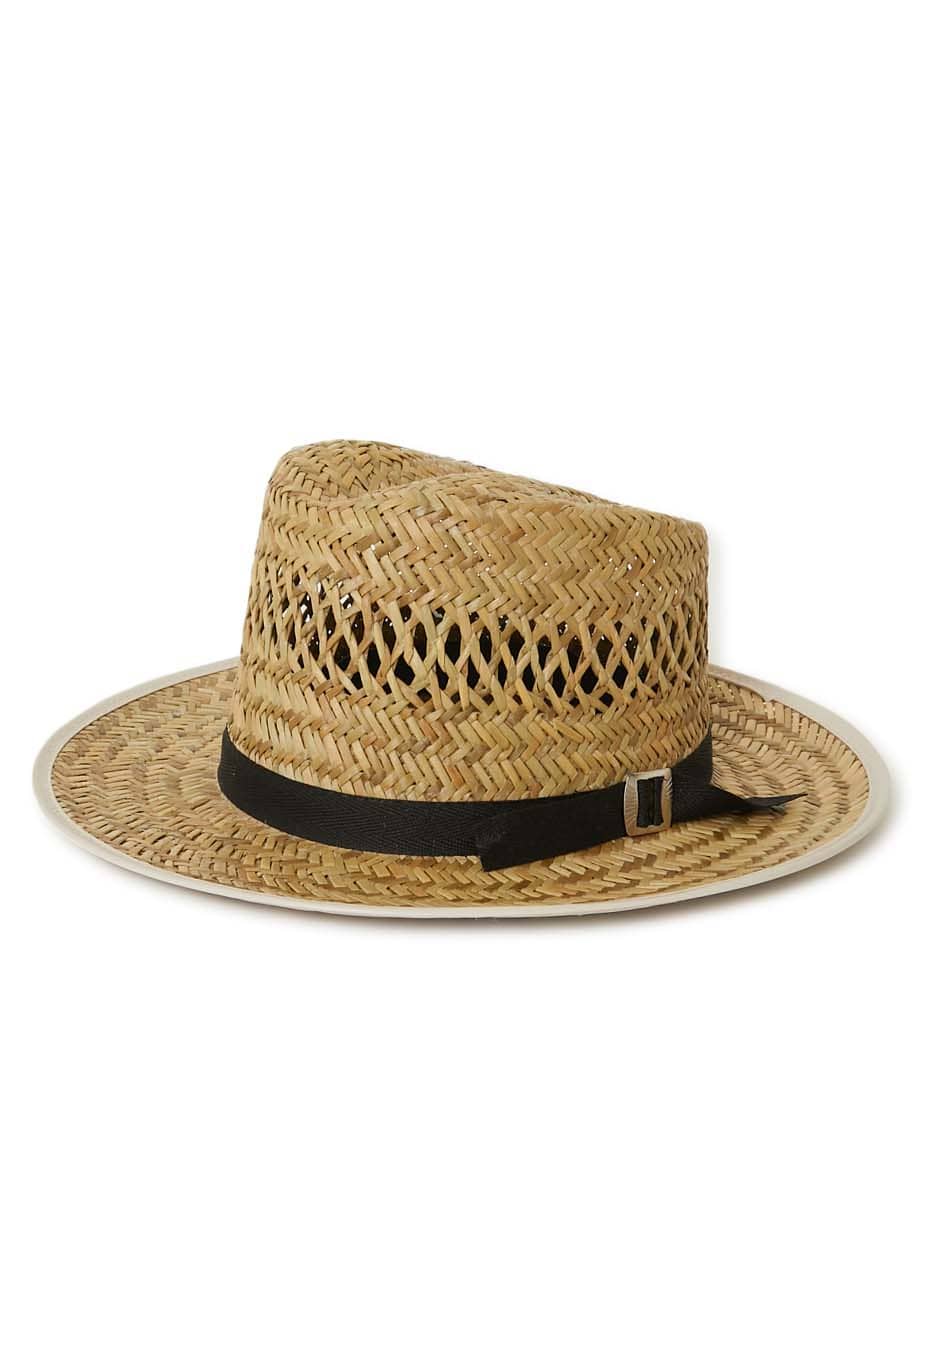 SUNSET STRAW HATS Horseshoe Crown 3/4 Black Hatband Vented Seagrass